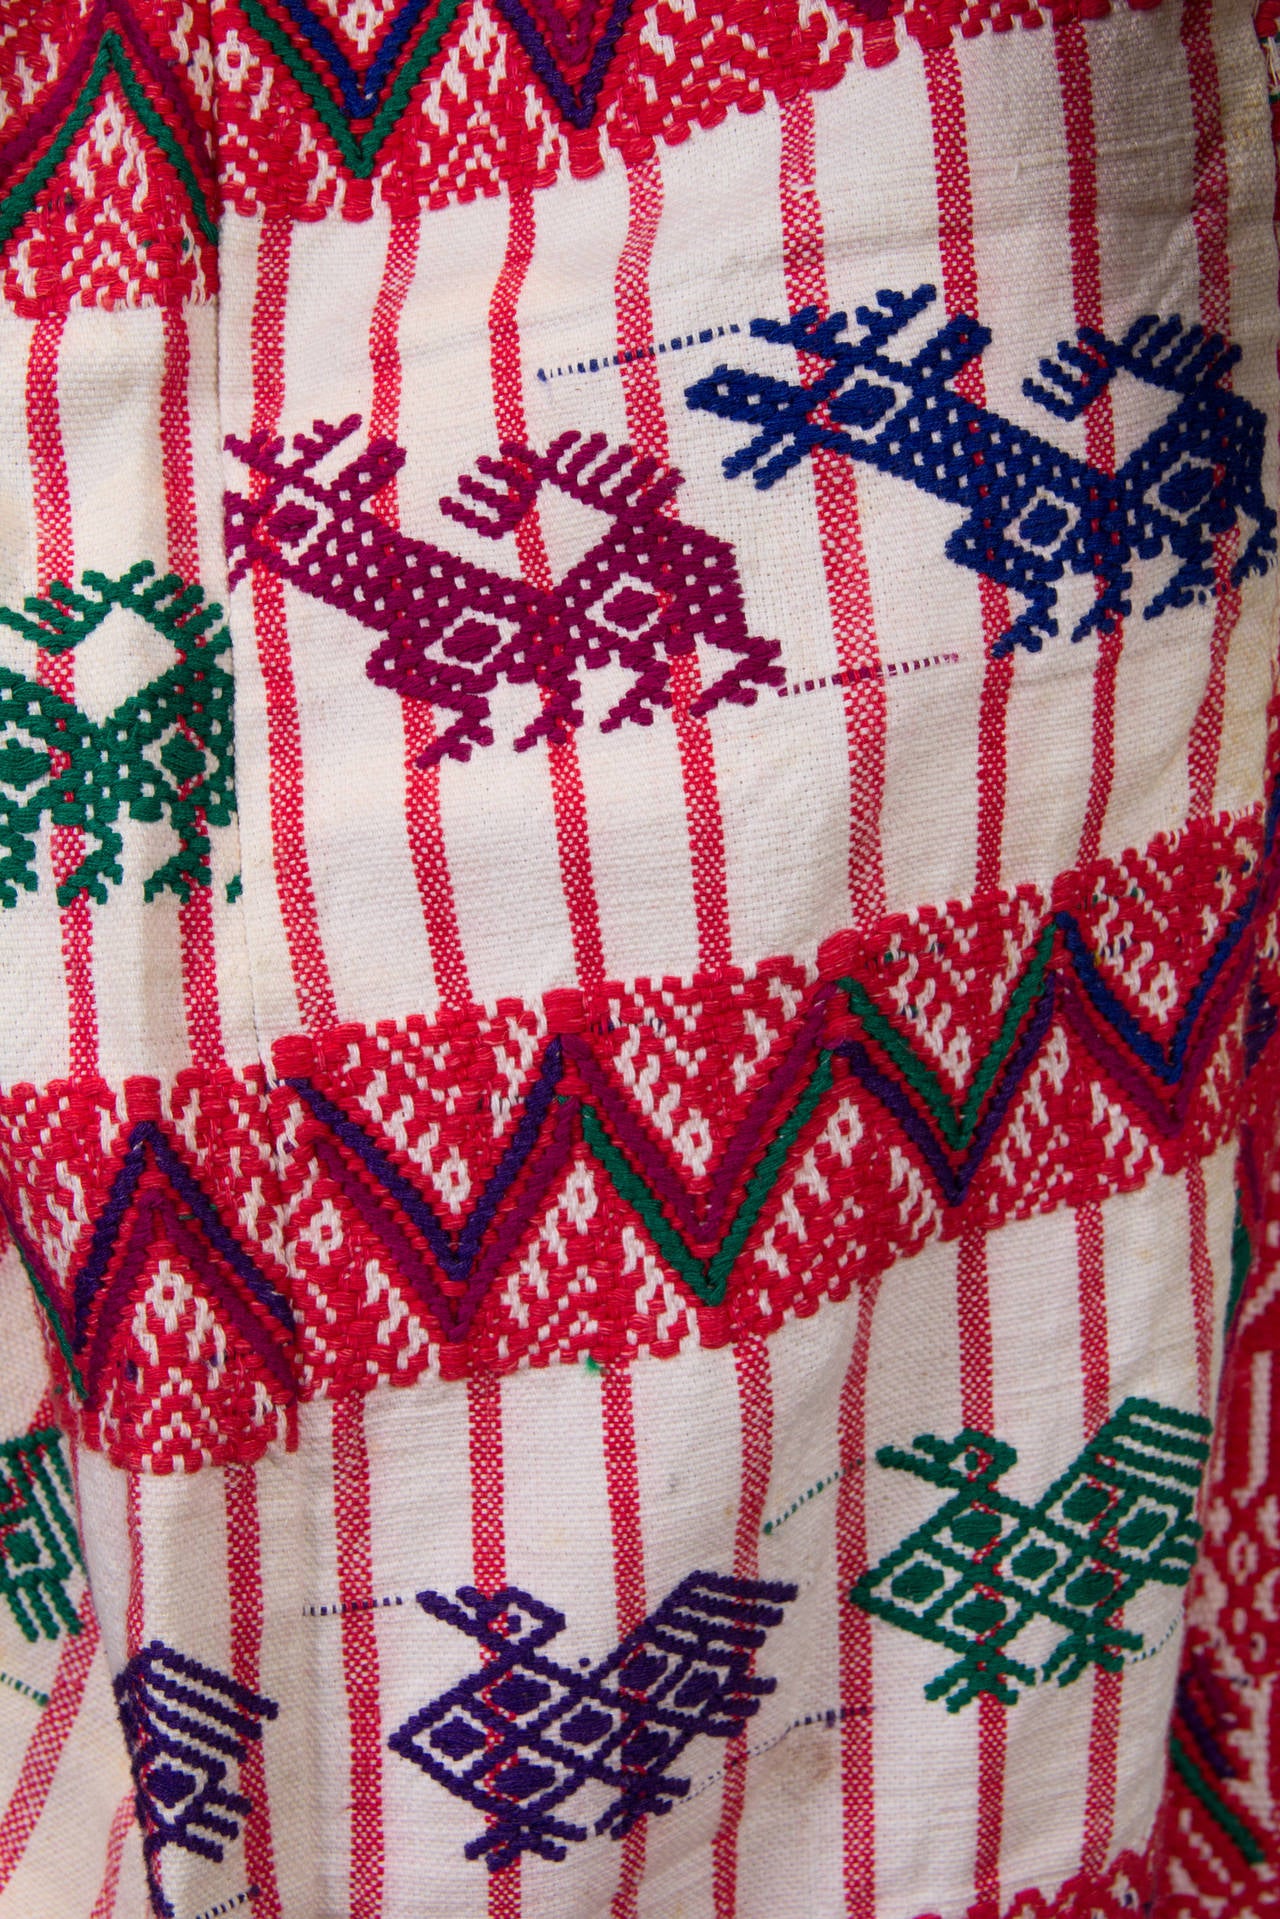 South American Ethnic Embroidery 3